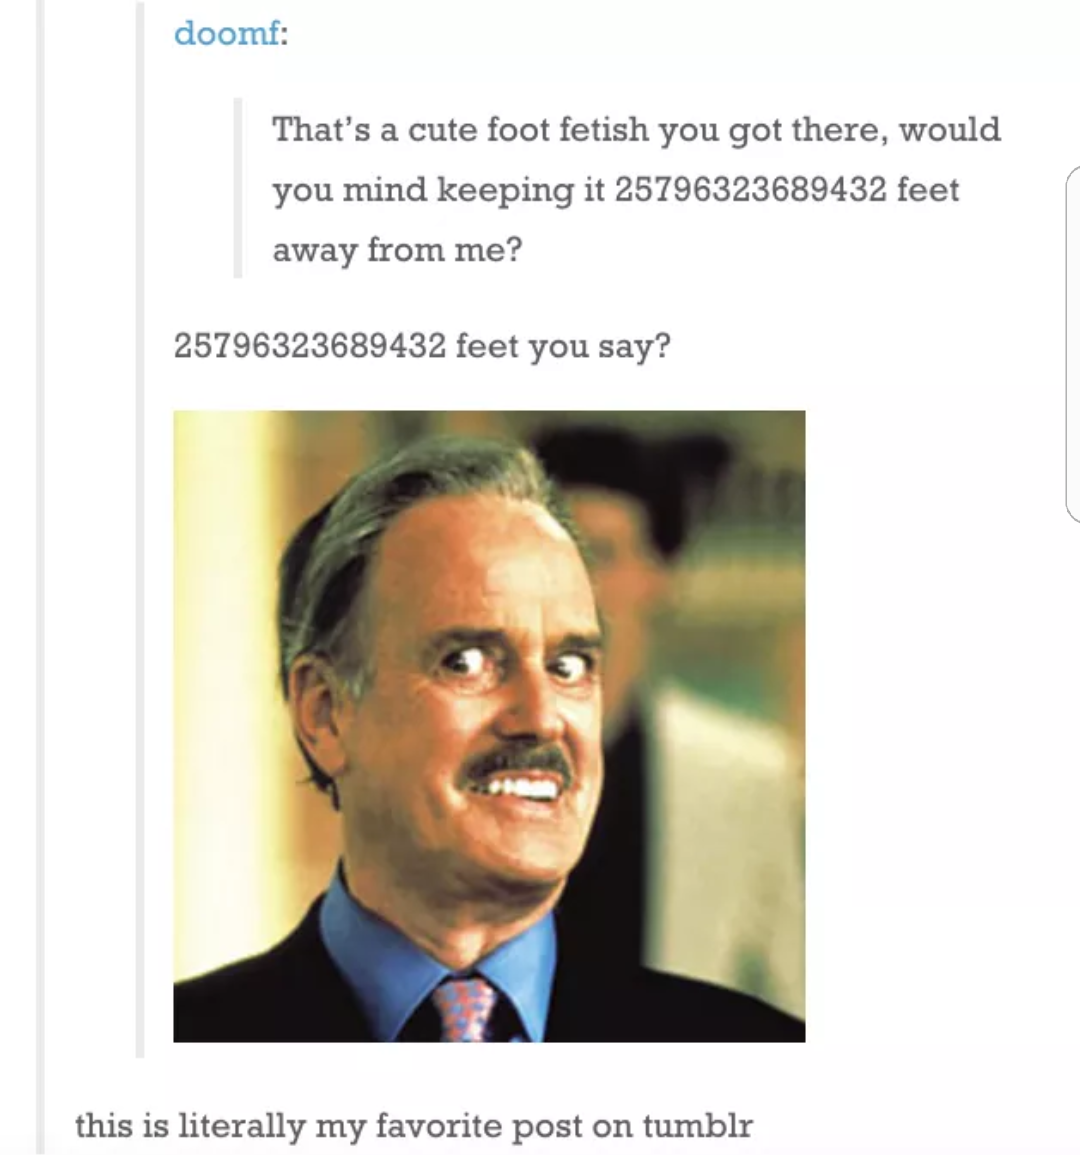 that's a cute foot fetish - doom That's a cute foot fetish you got there, would you mind keeping it 25796323689432 feet away from me? 25796323689432 feet you say? this is literally my favorite post on tumblr